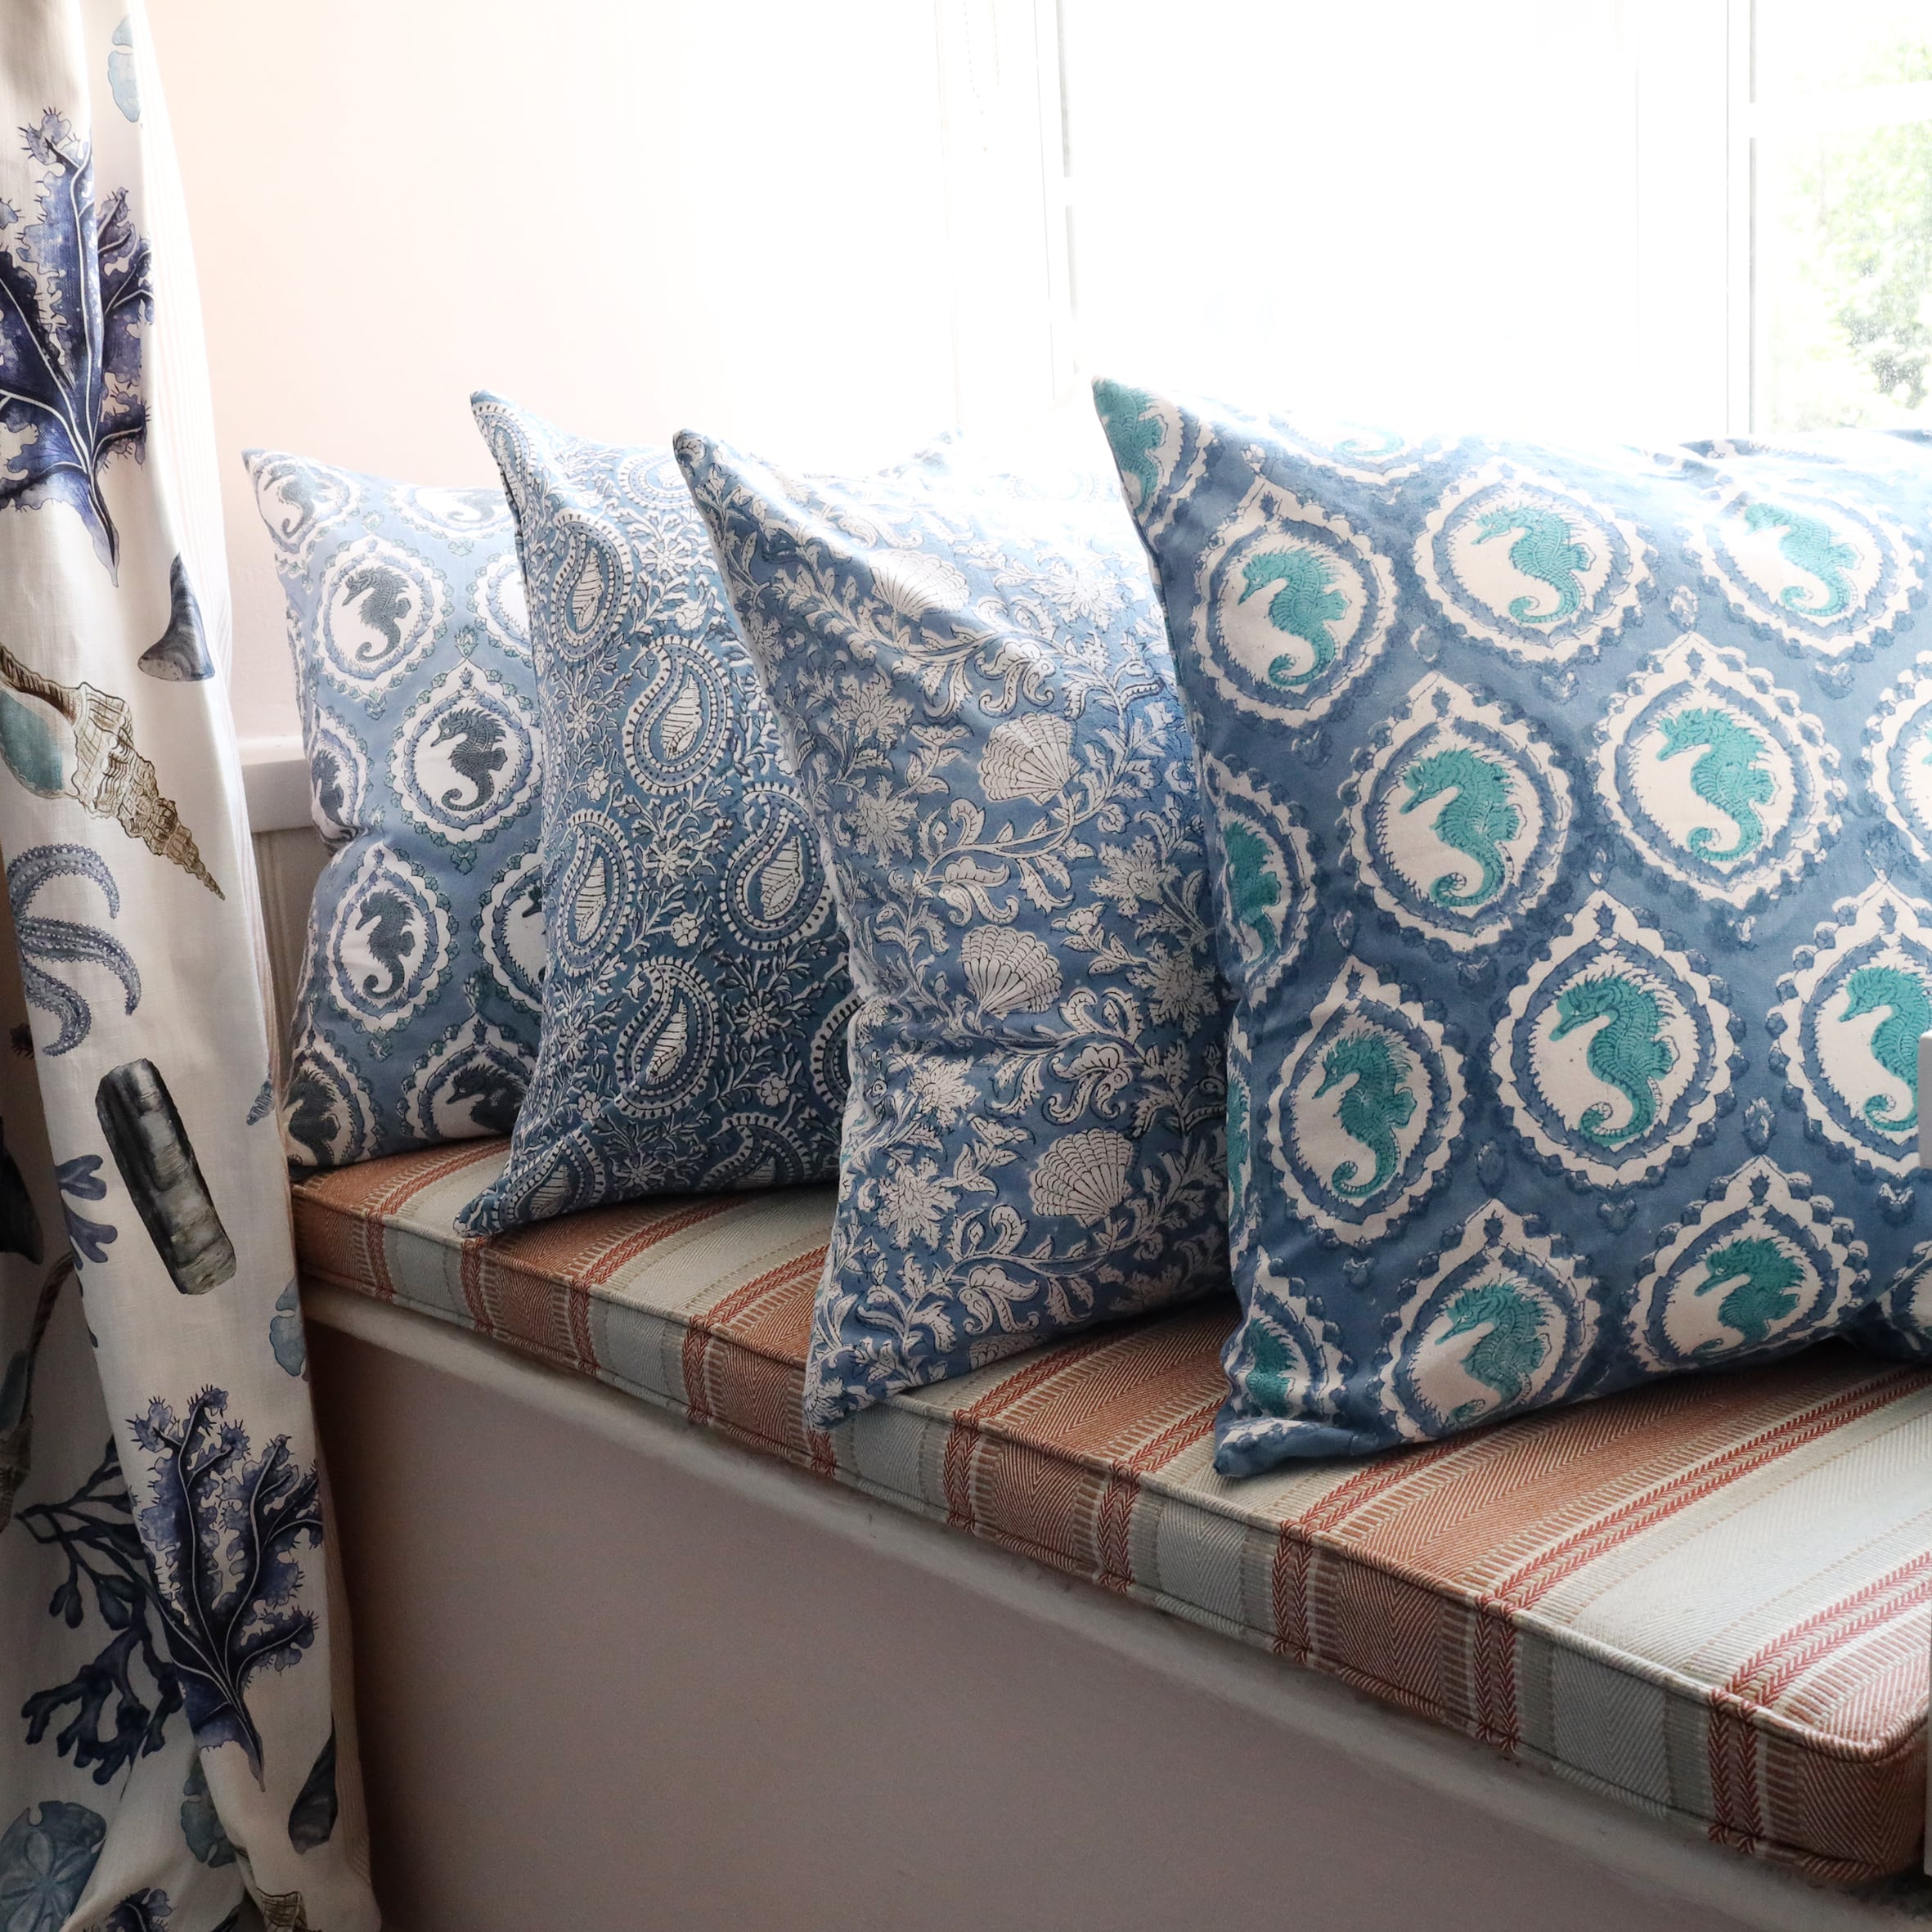 Marine Blue Seahorse Cameo cushion which is Hand block printed fabric in a soft blue on a window seat.Also on the seat are other Hand block printed cushions,you can see the Rockpool Curtains to the side.